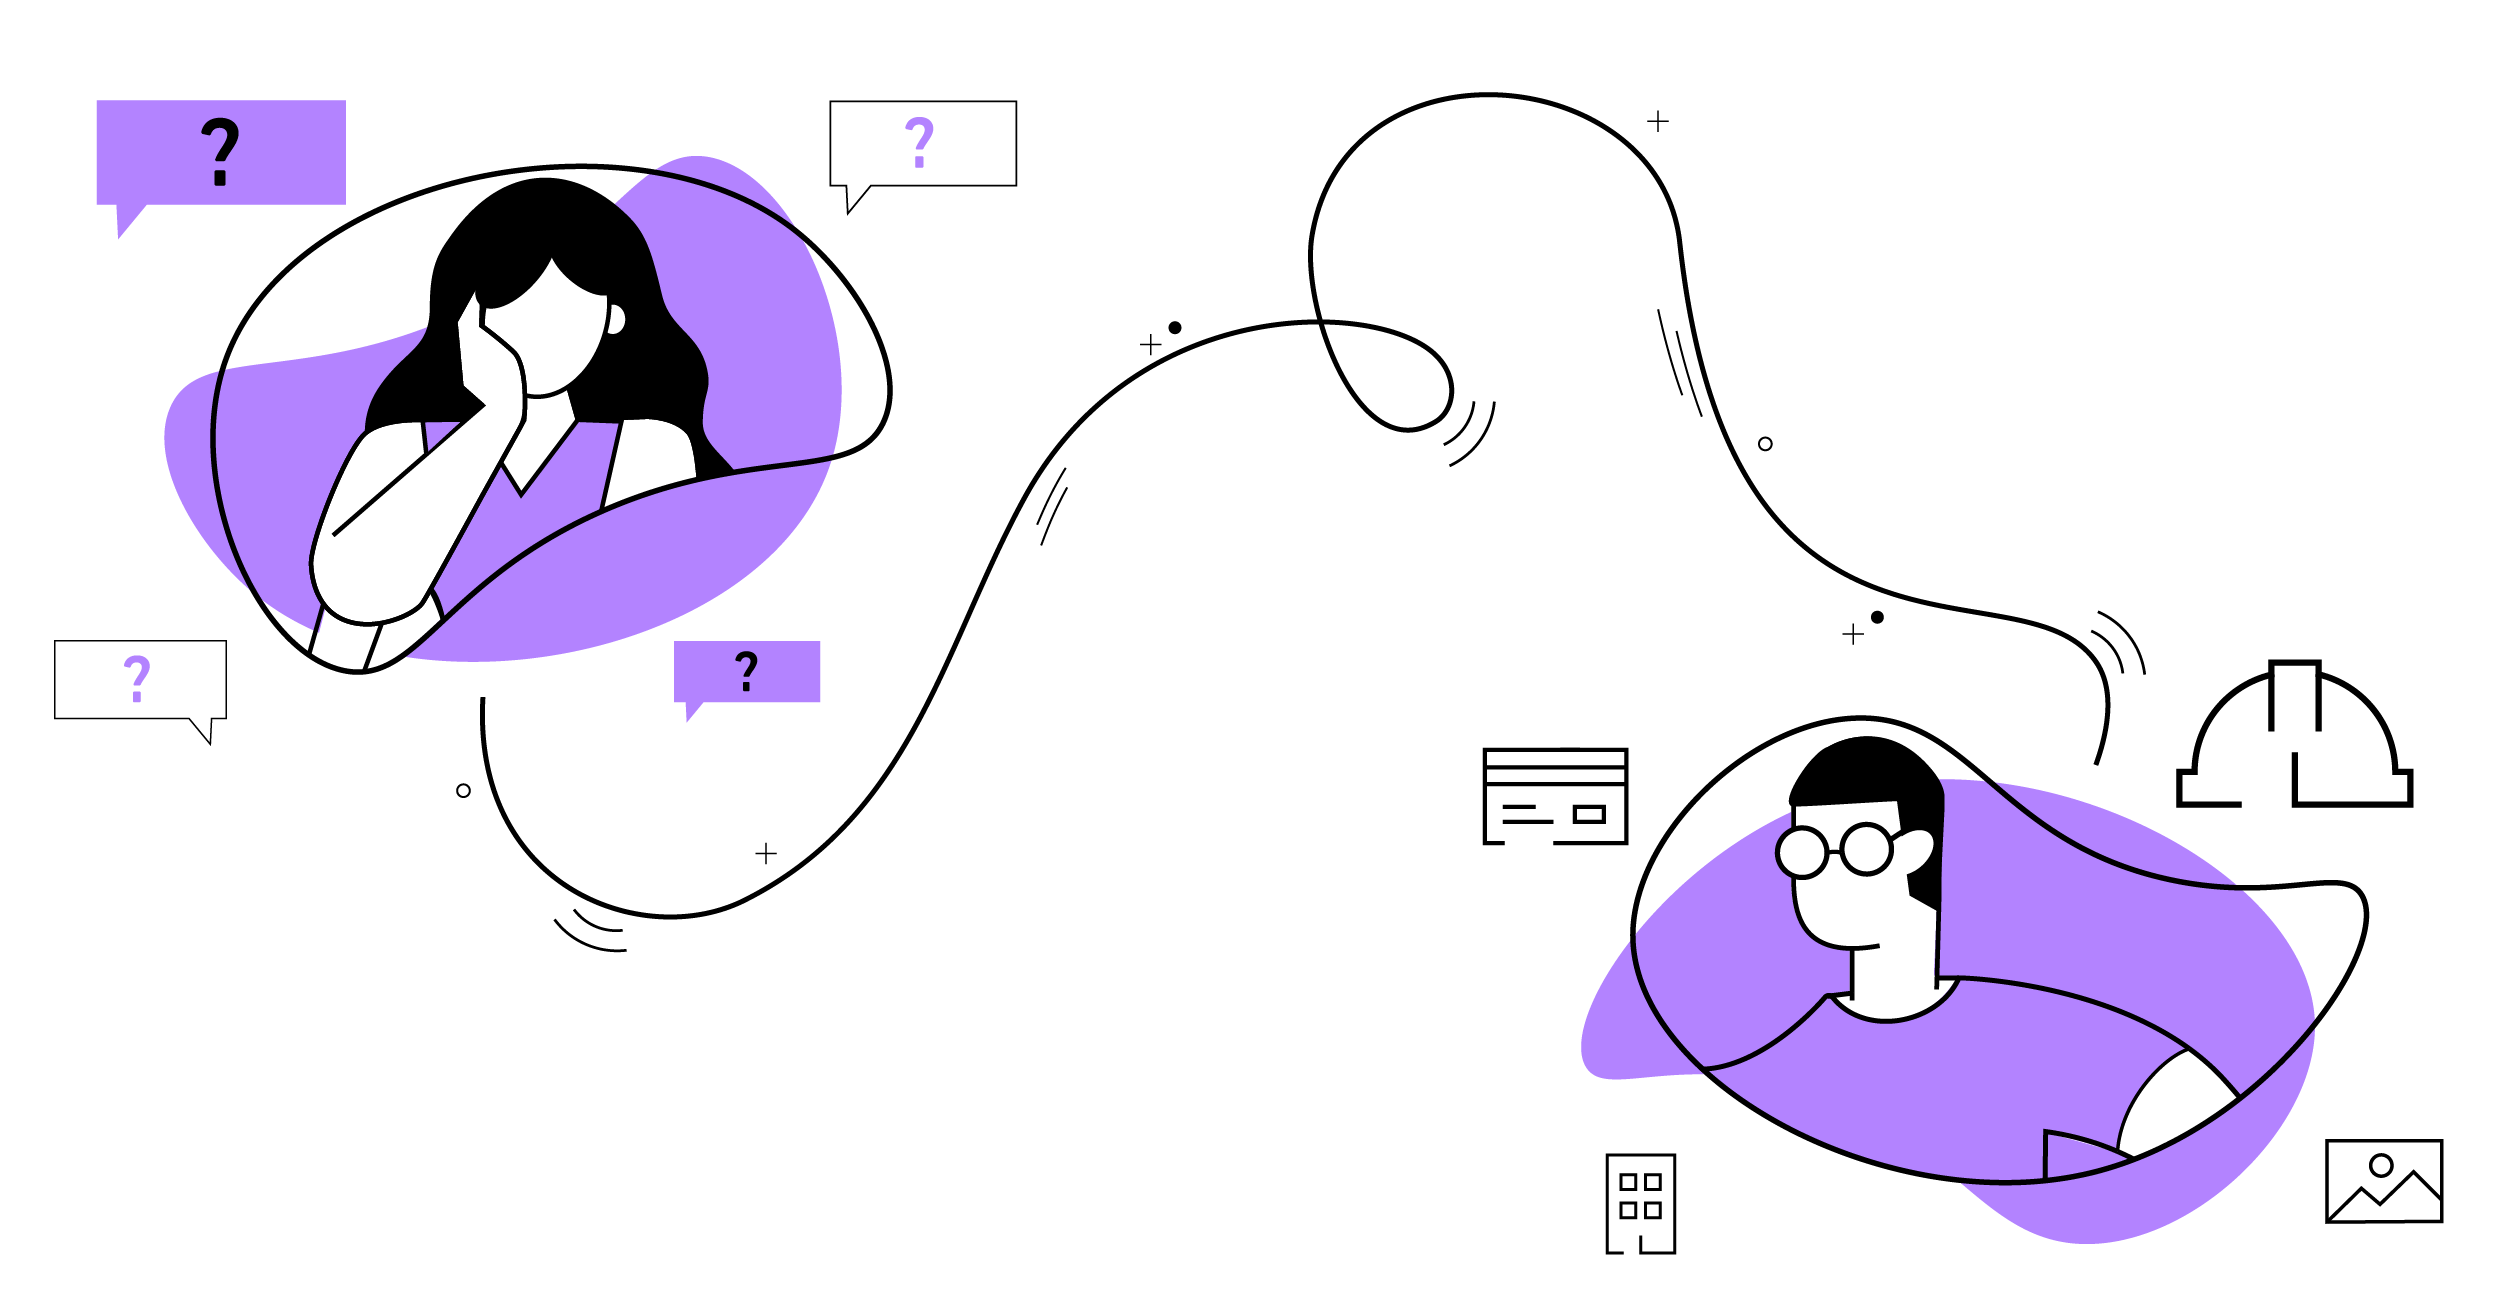 Illustration of two residents connected by a line. One is surrounded by question marks and the other by apartment icons